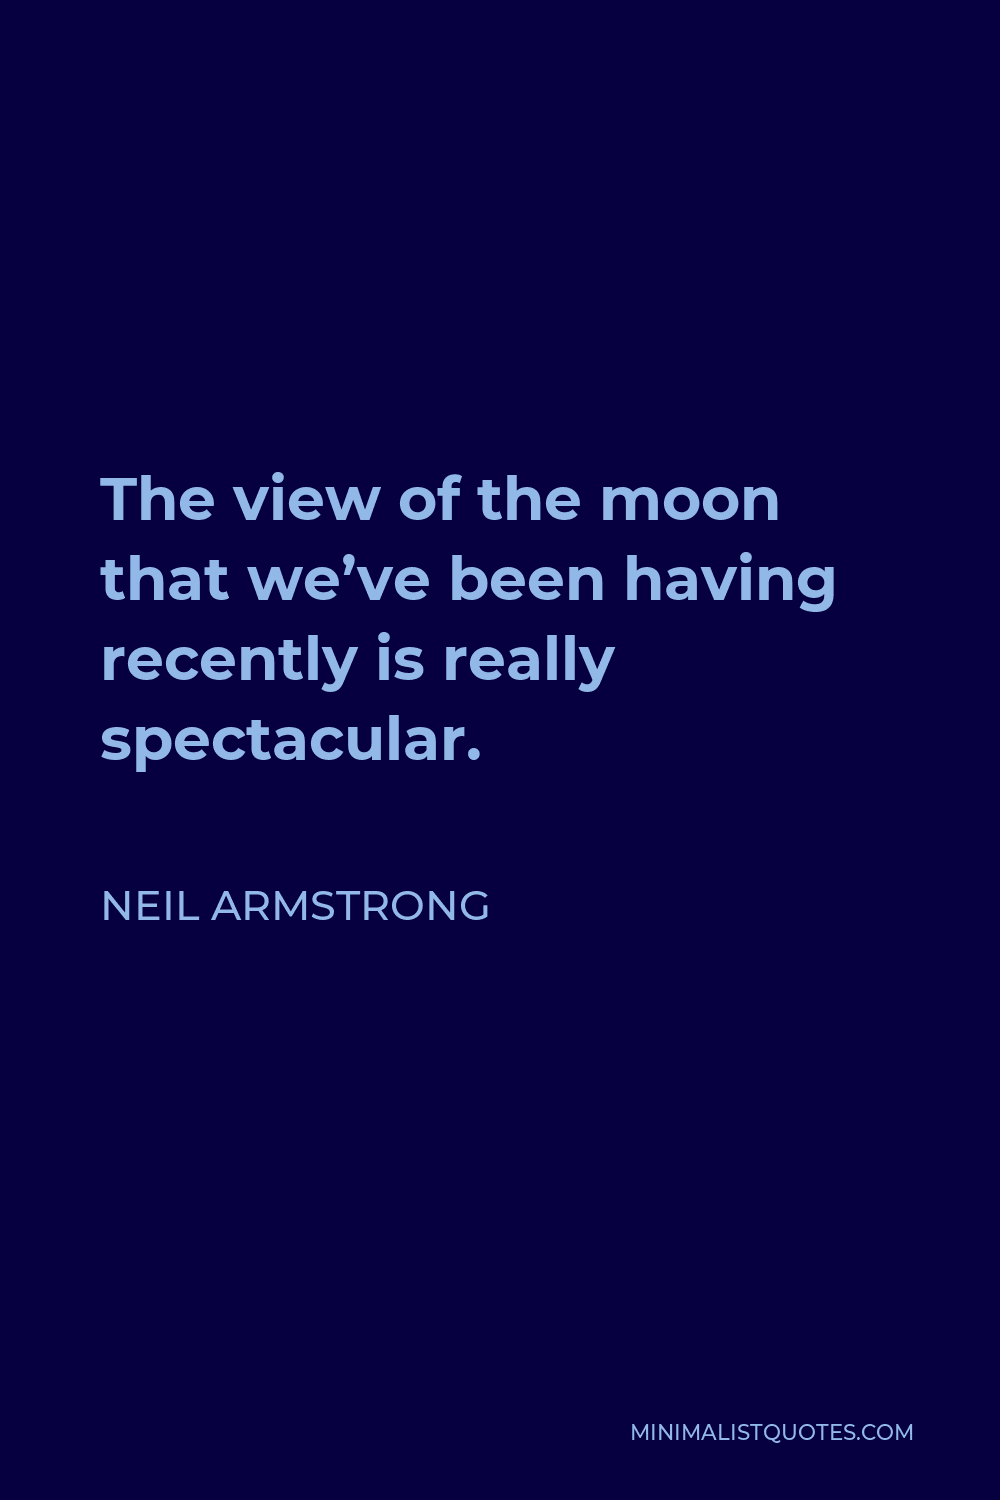 Neil Armstrong Quote - The view of the moon that we’ve been having recently is really spectacular.